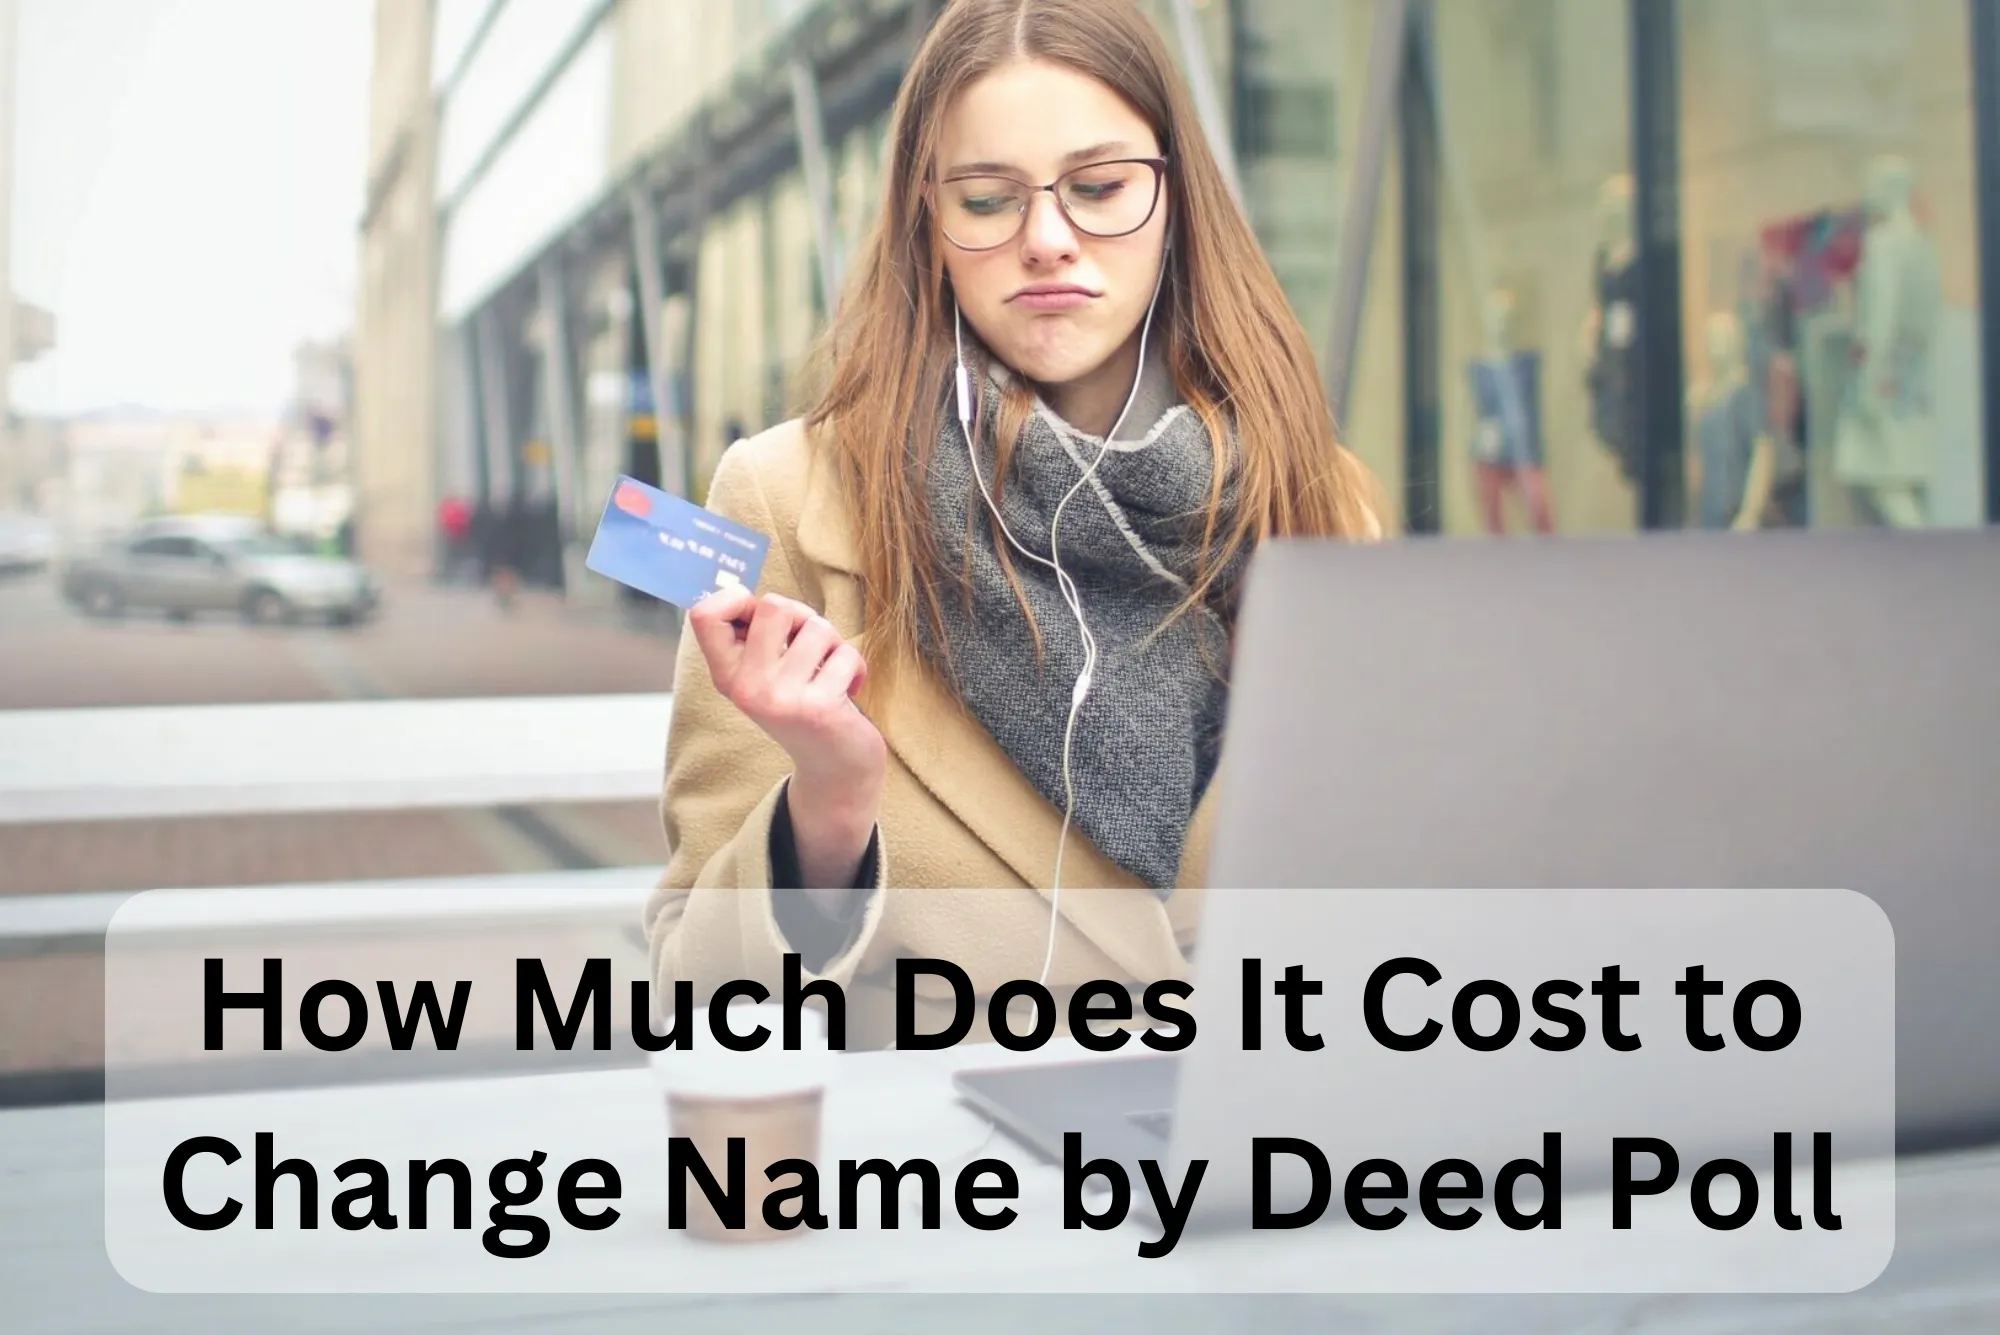 Cost to Change Name by Deed Poll